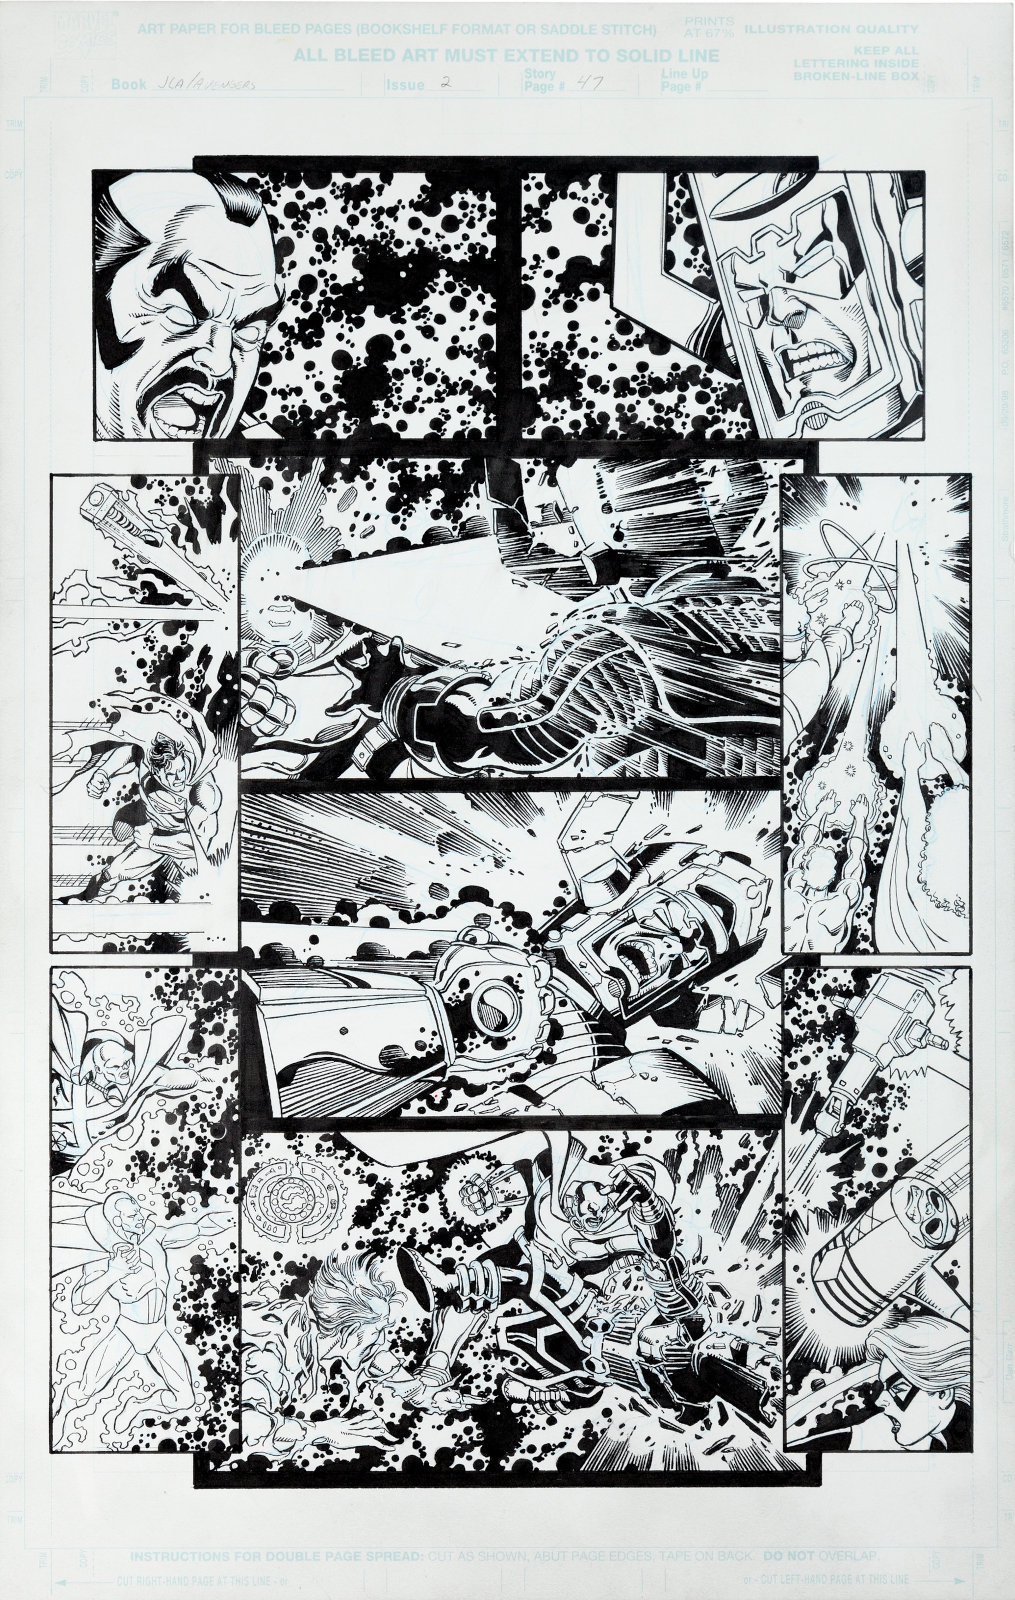 JLA Avengers issue 2 page 47 by George Perez and Tom Smith